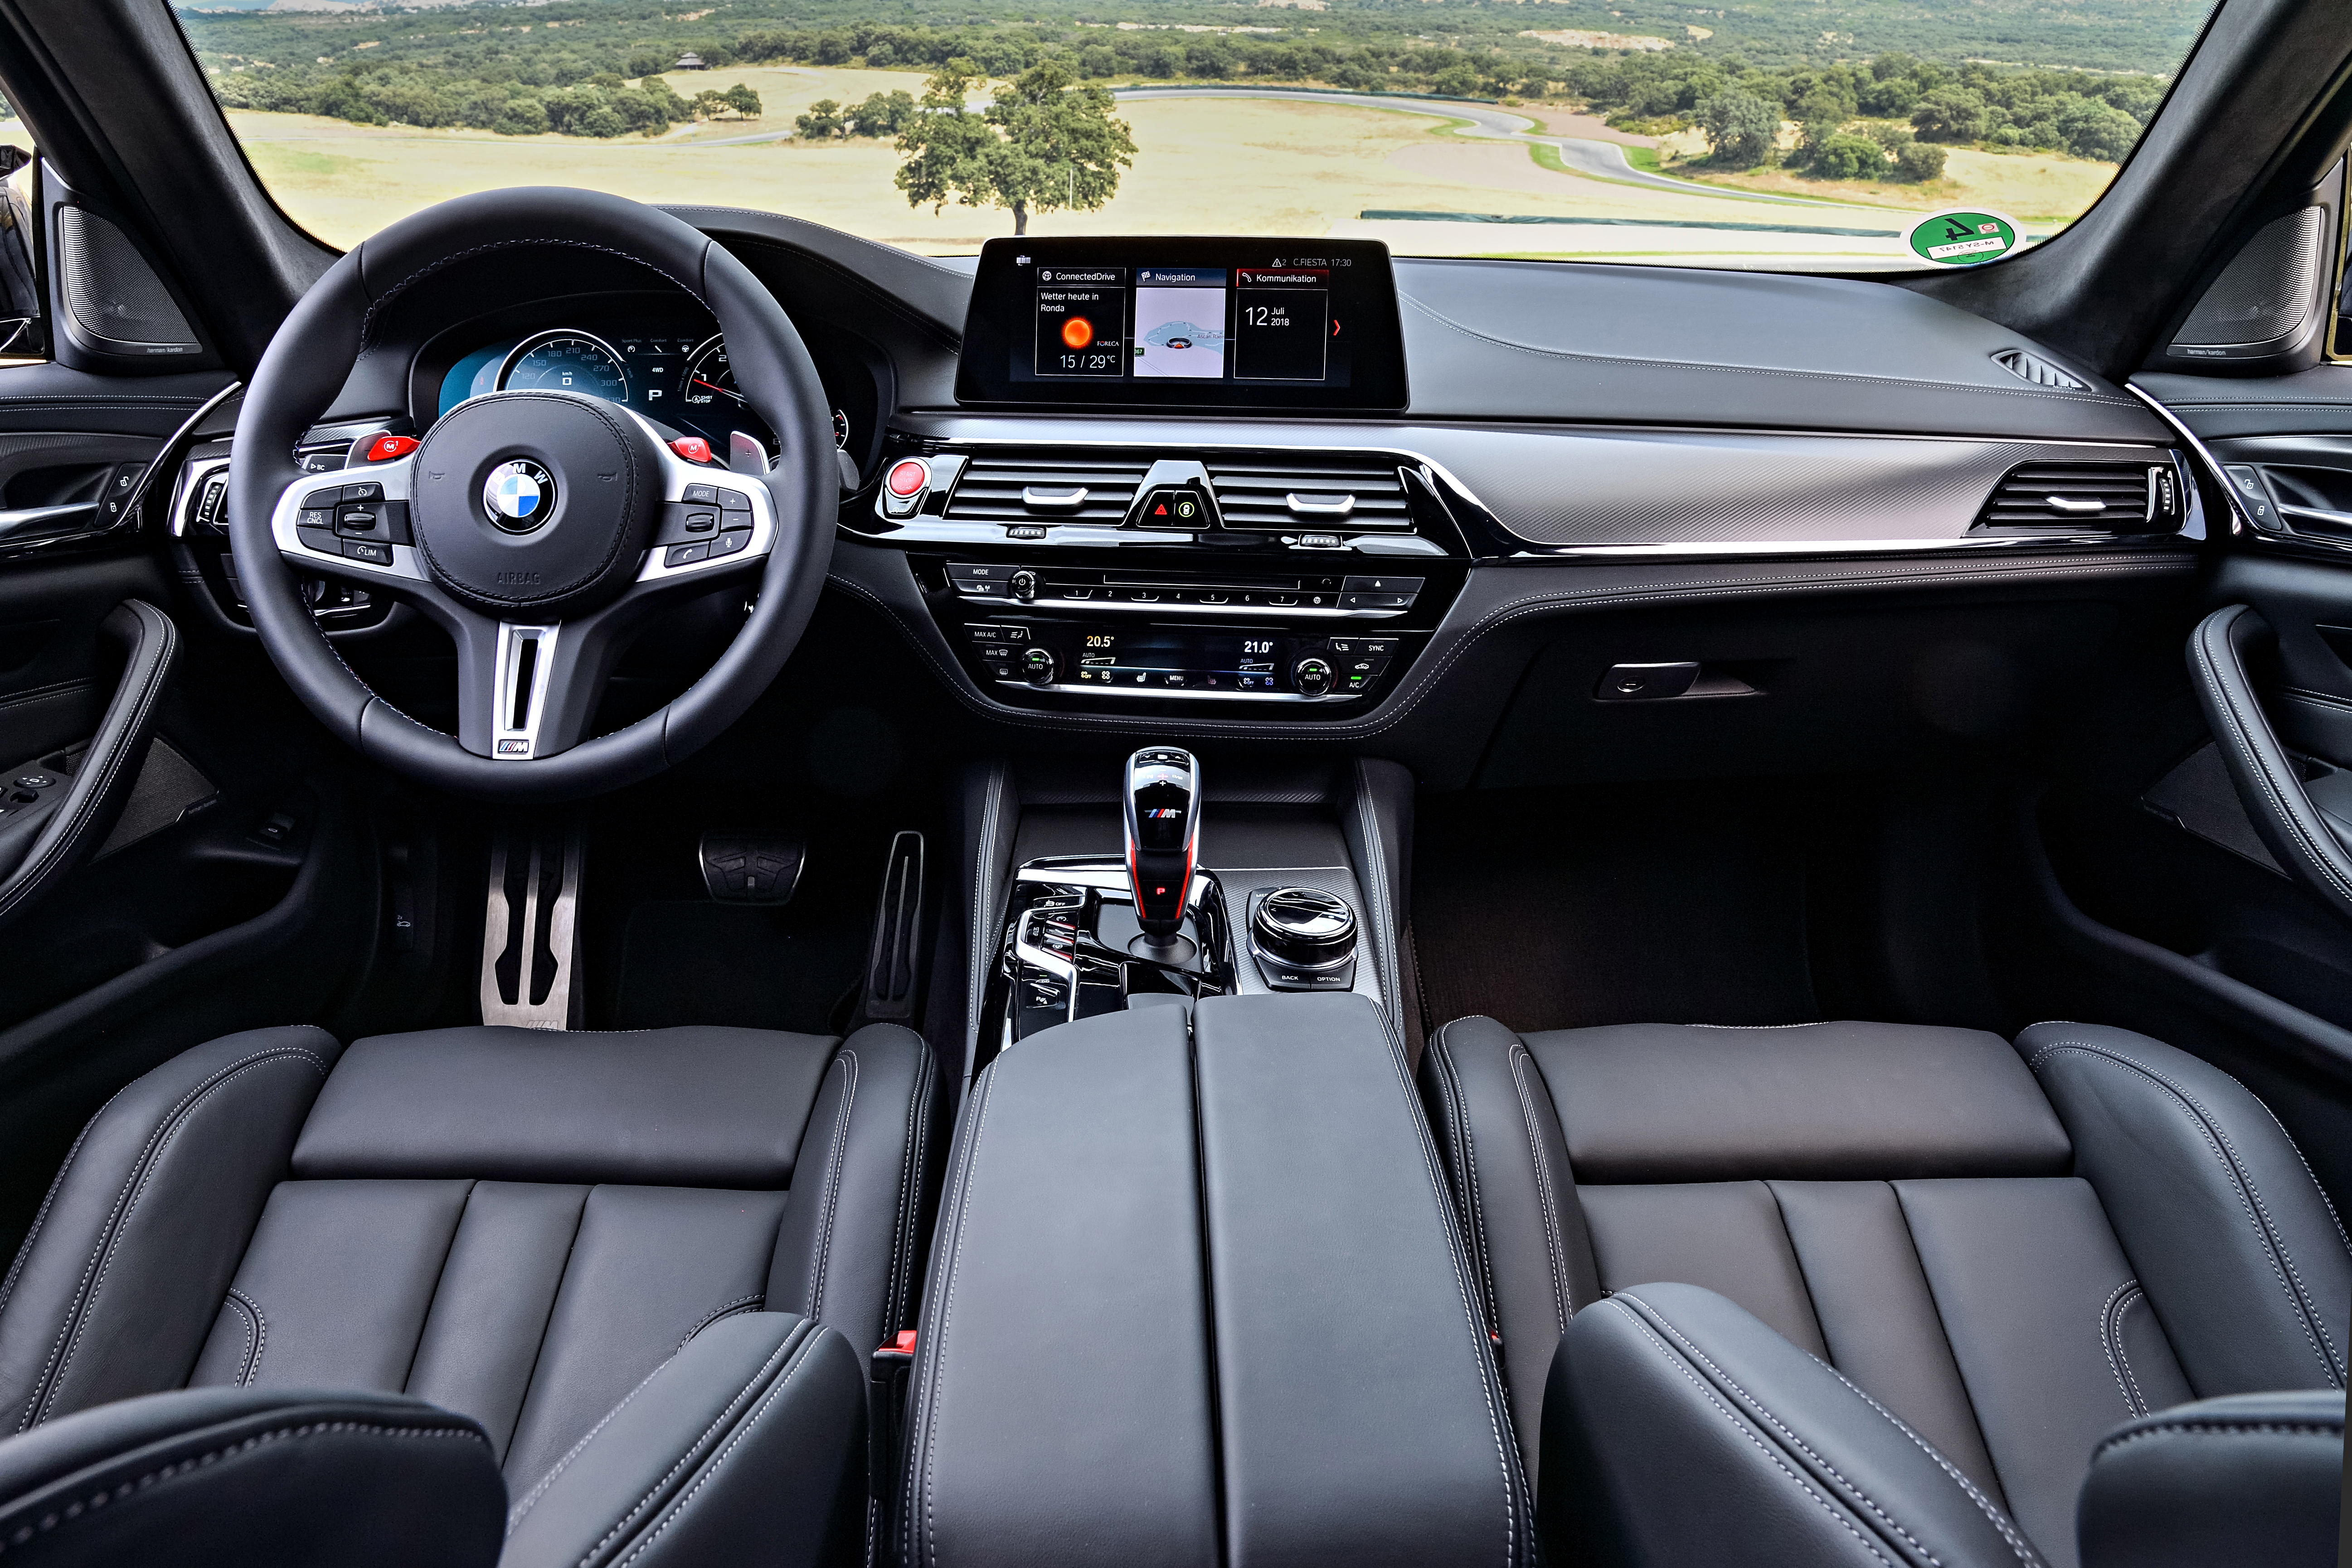 The interior remains largely unchanged over the standard M5